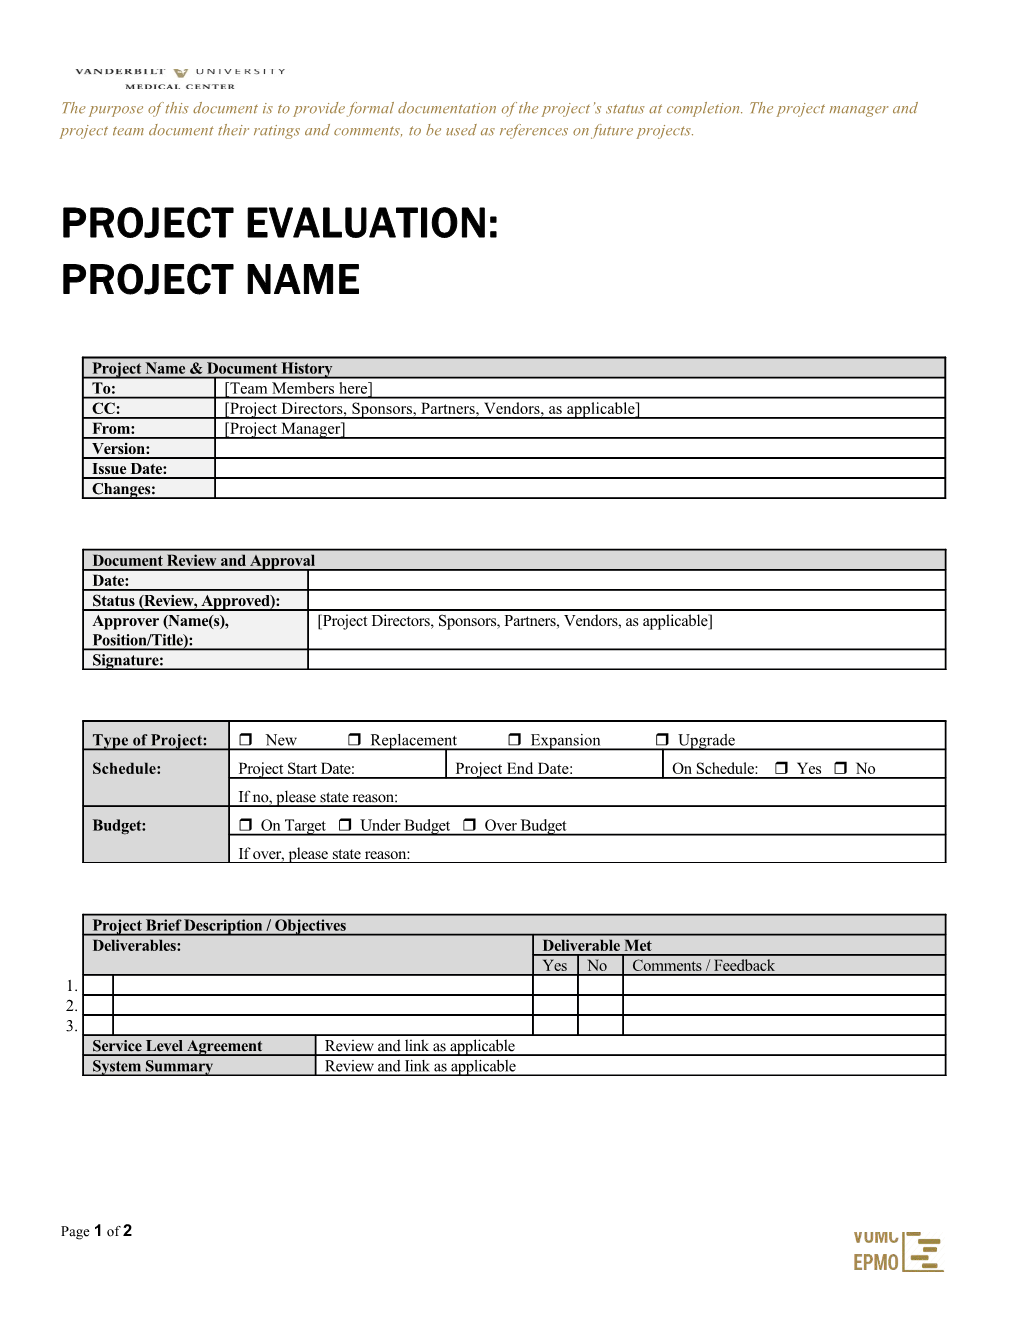 The Purpose of This Document Is to Provide Formal Documentation of the Project S Status